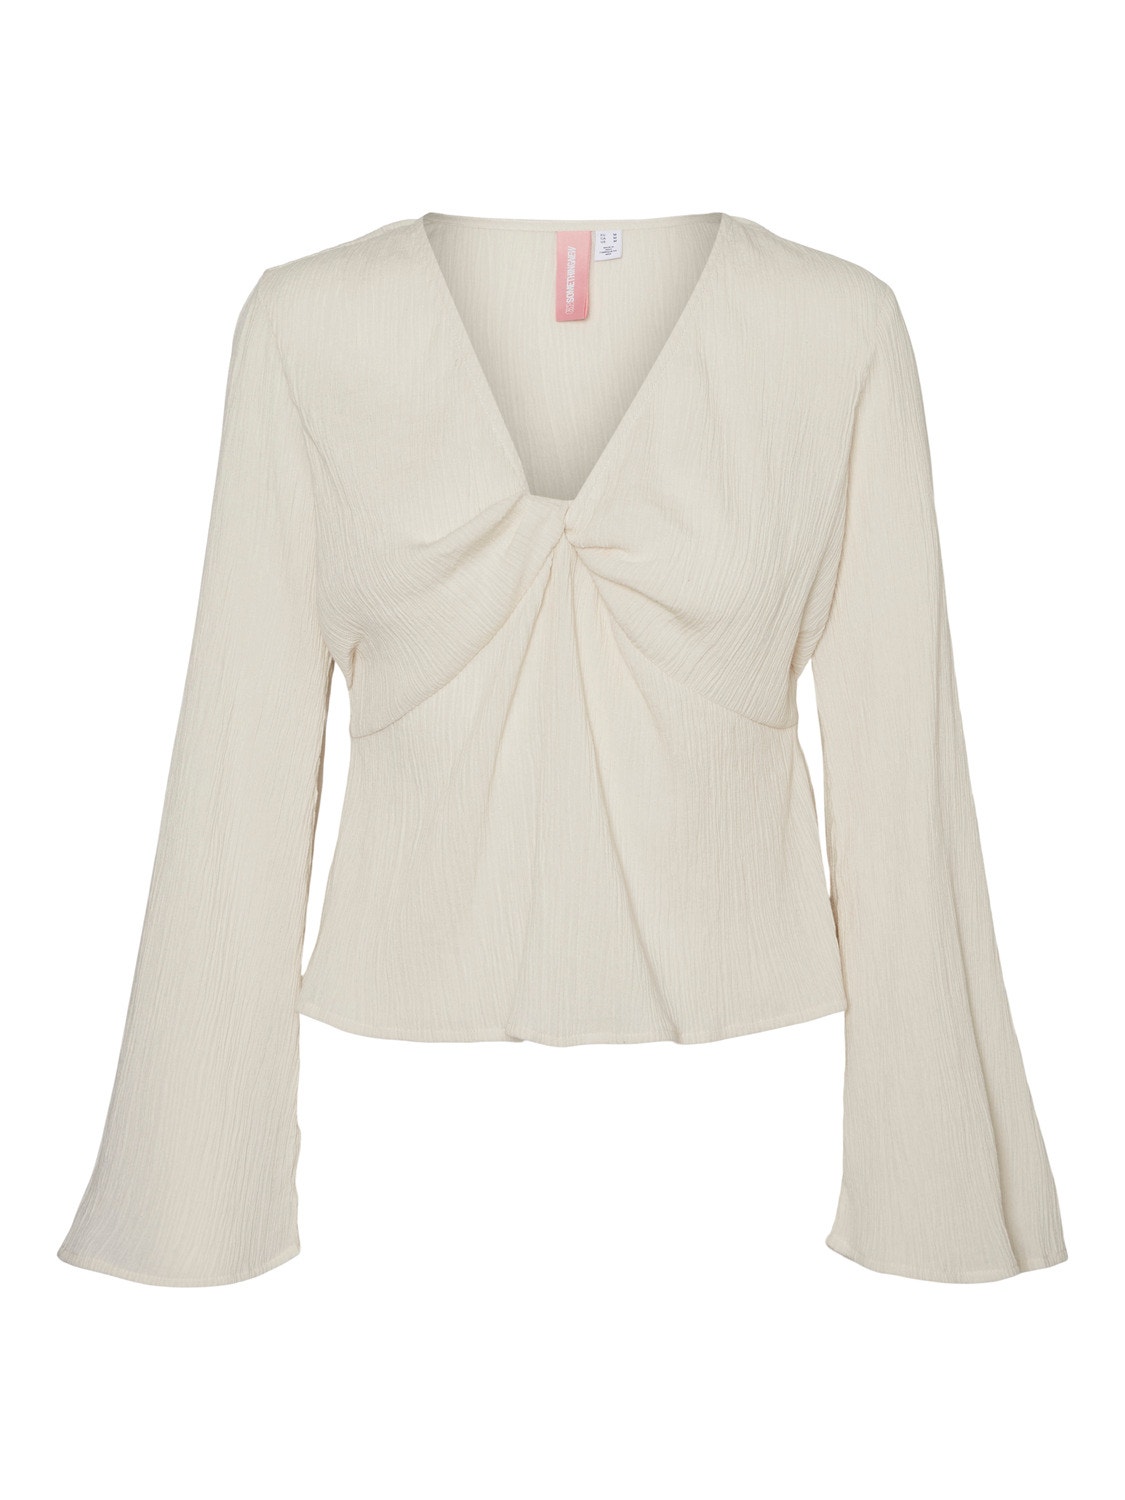 Vero Moda SOMETHINGNEW STYLED BY MARIE JEDIG Tops -Perfectly Pale - 10288249